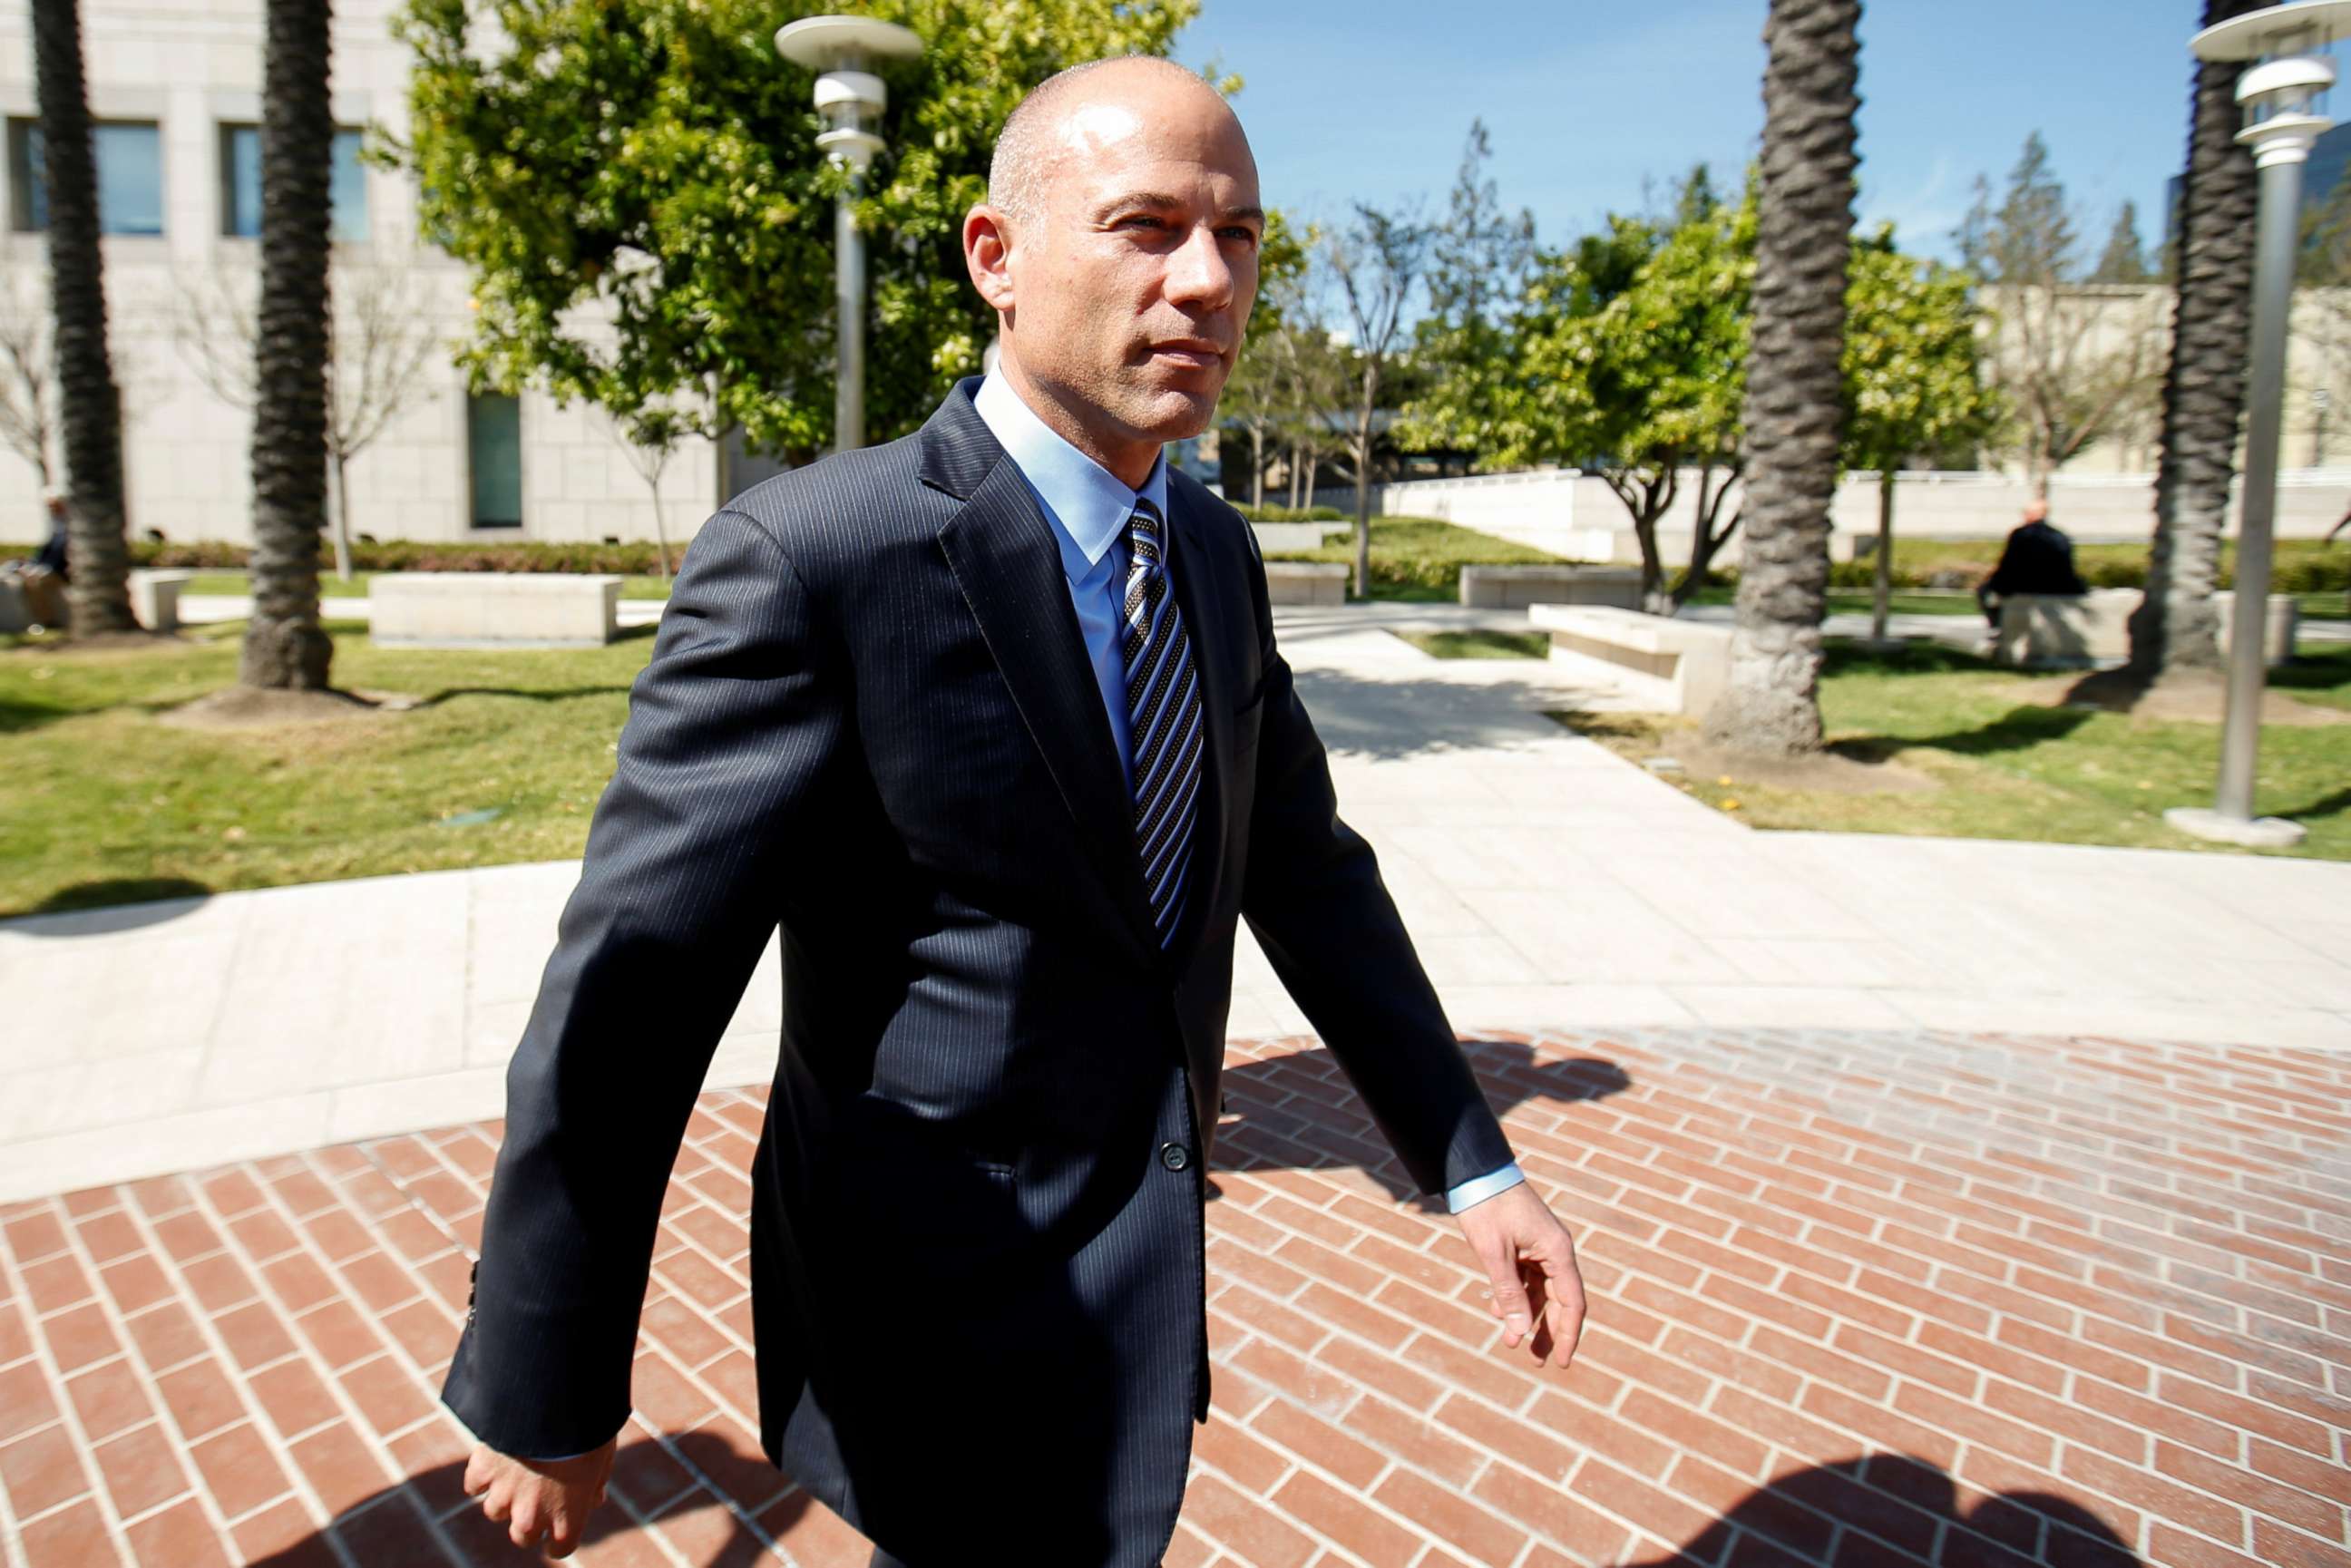 PHOTO: In this April 1, 2019 file photo Attorney Michael Avenatti leaves court after making an initial appearance on charges of bank and wire fraud at federal court in Santa Ana, Calif.